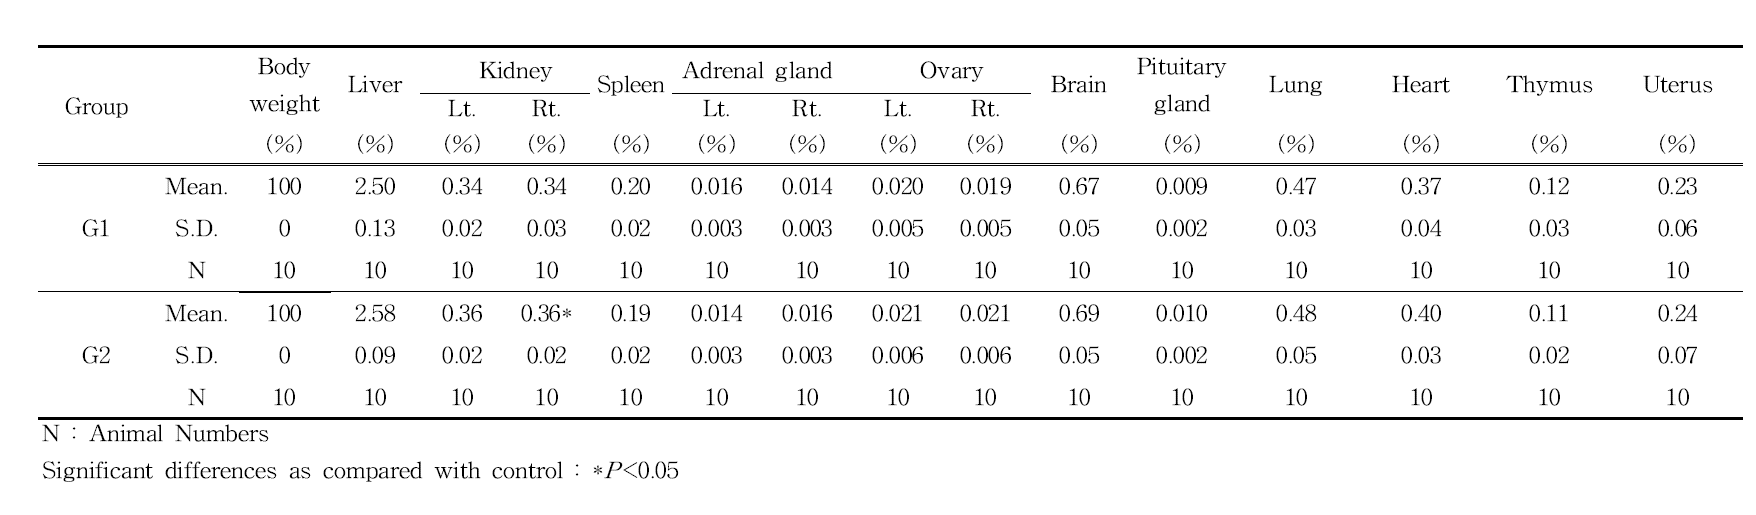 Relative organ weights of female rats in 3D printed PCL